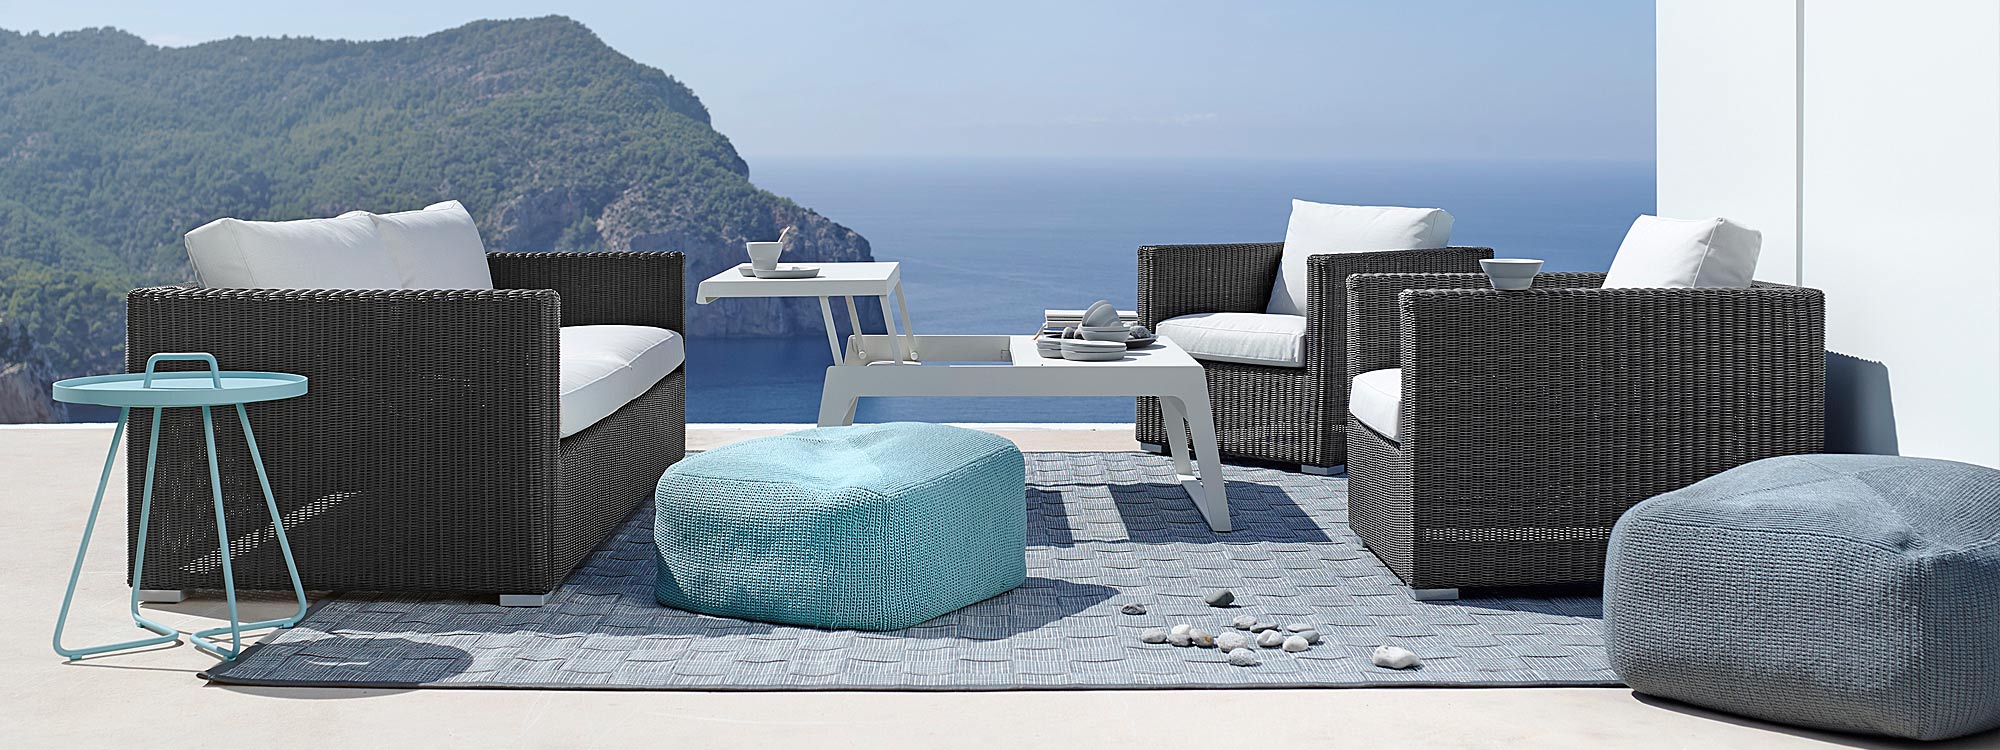 Chester rattan garden sofa & outdoor lounge furniture includes a spacious 3 seat sofa & lounge chair by Caneline garden furniture company.